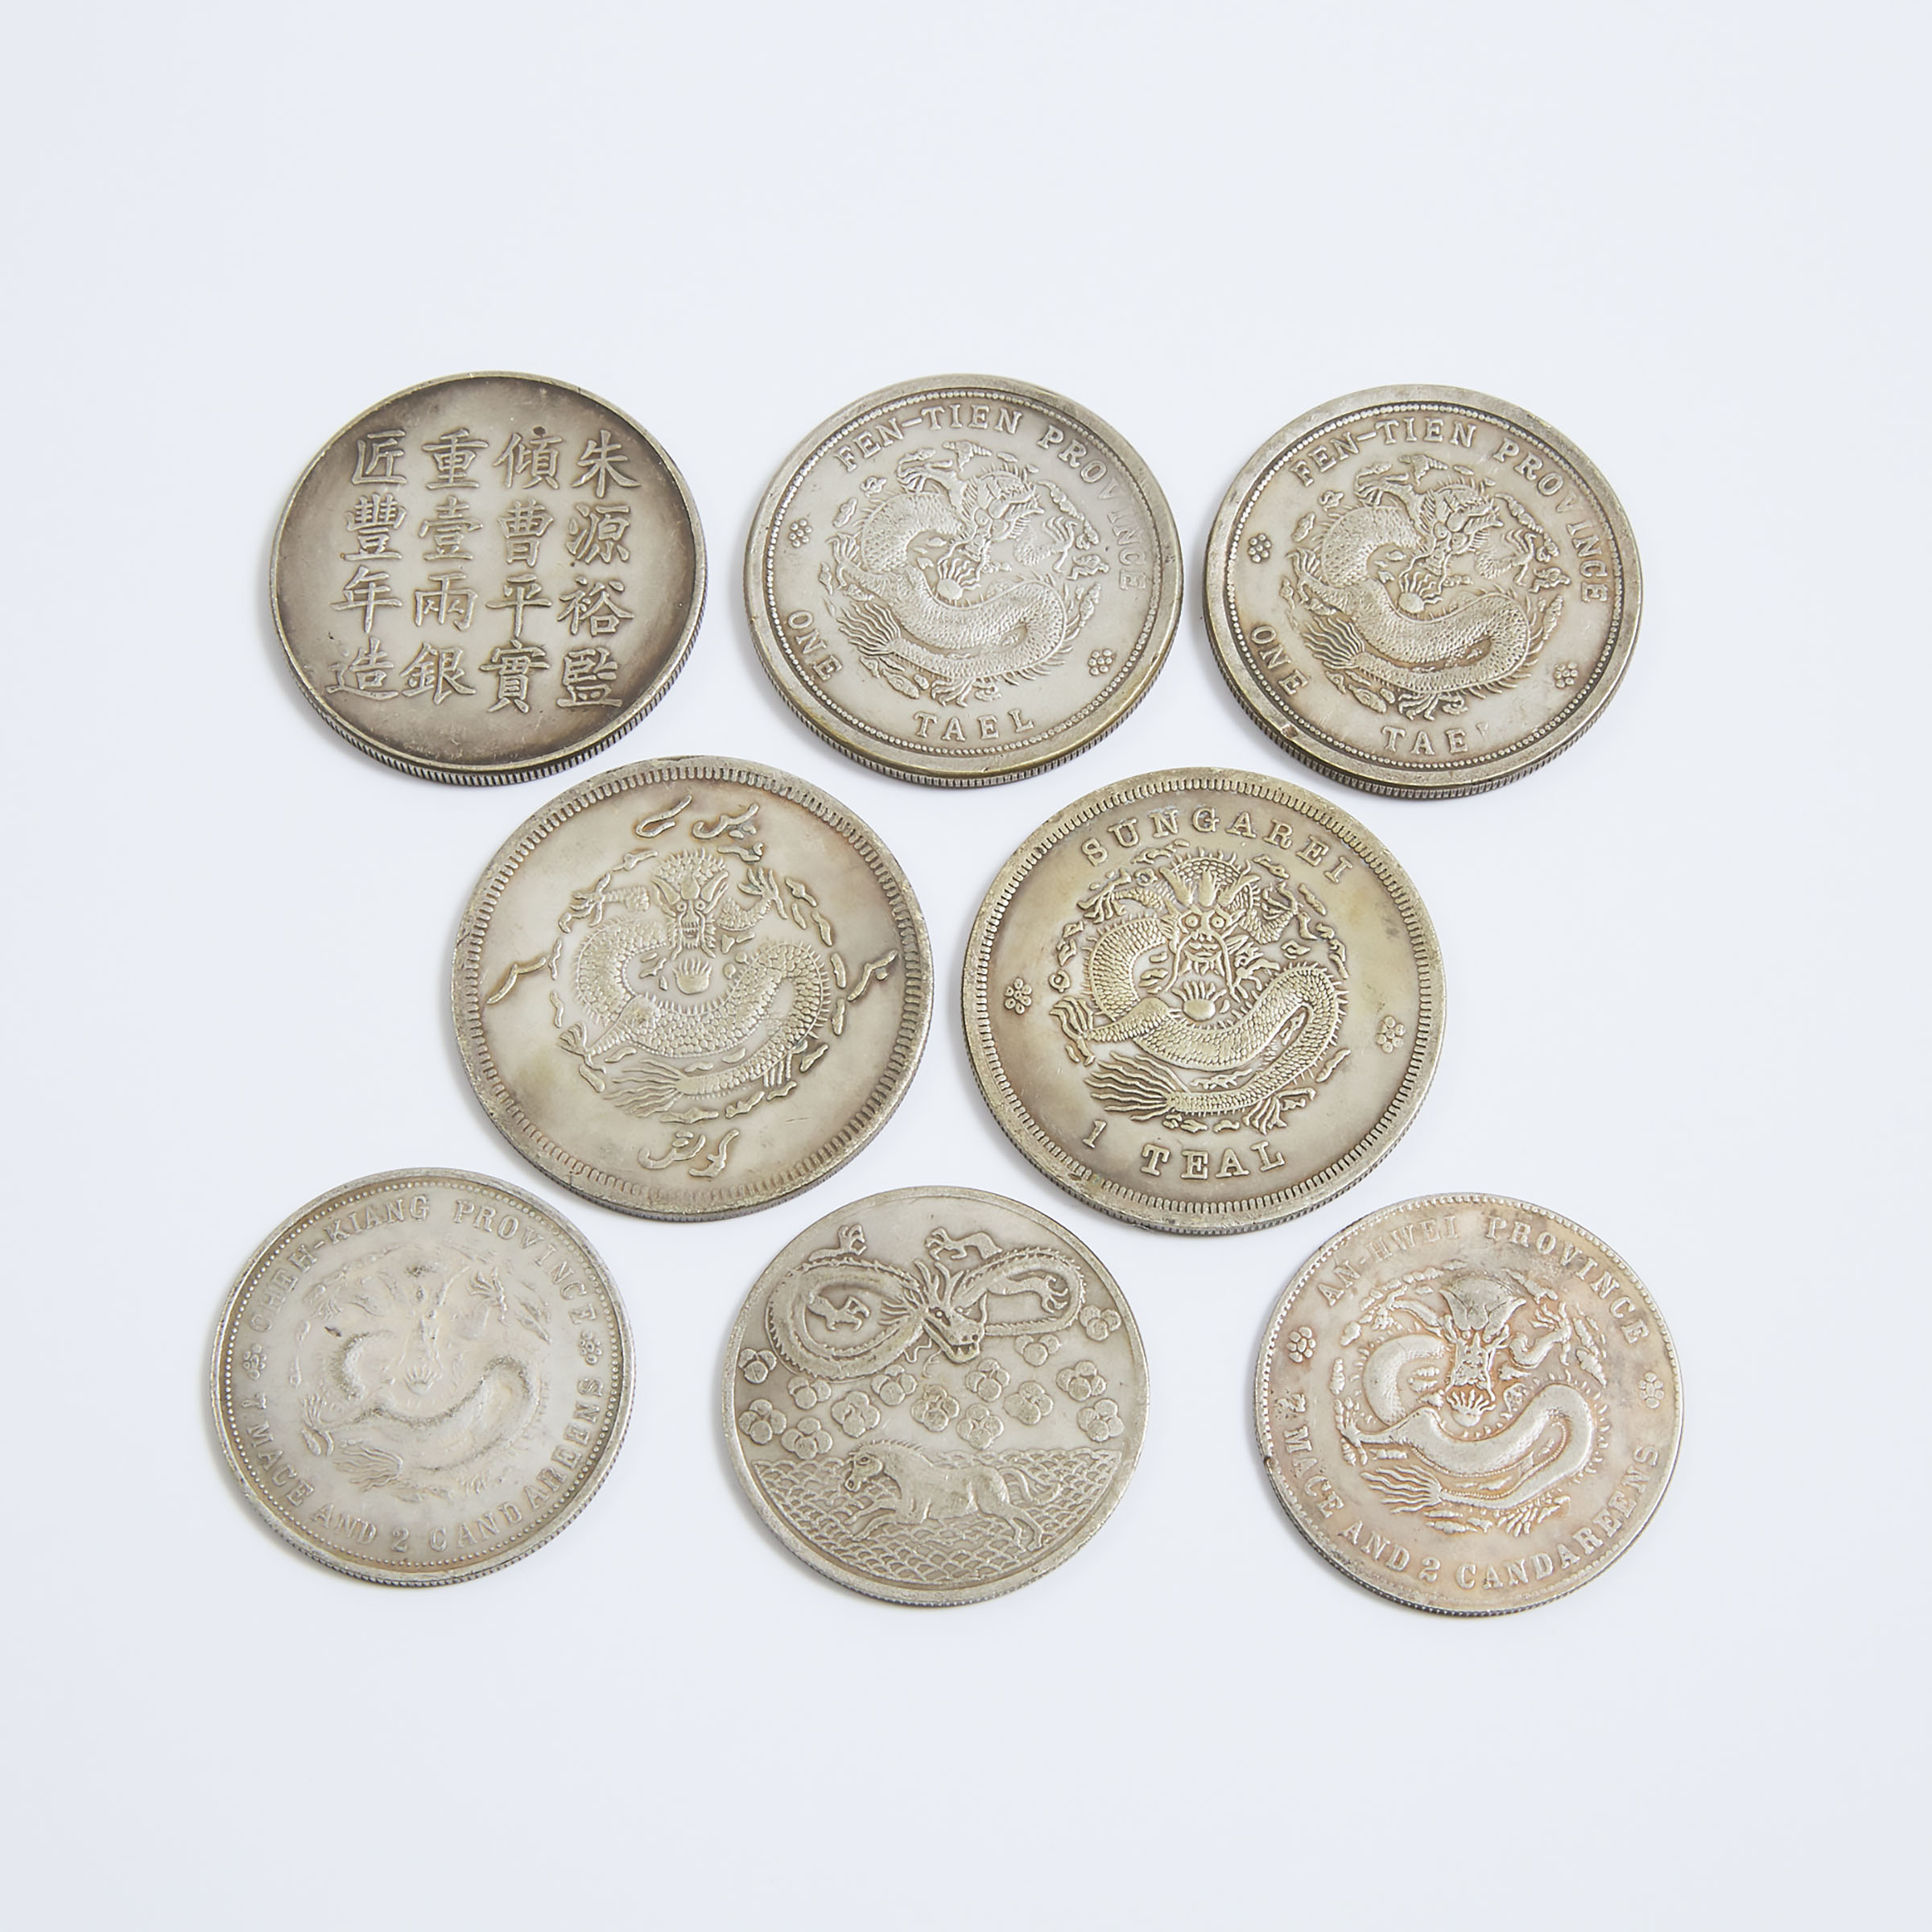 Eight Chinese Silver Coins With Late Qing Dynasty Marks